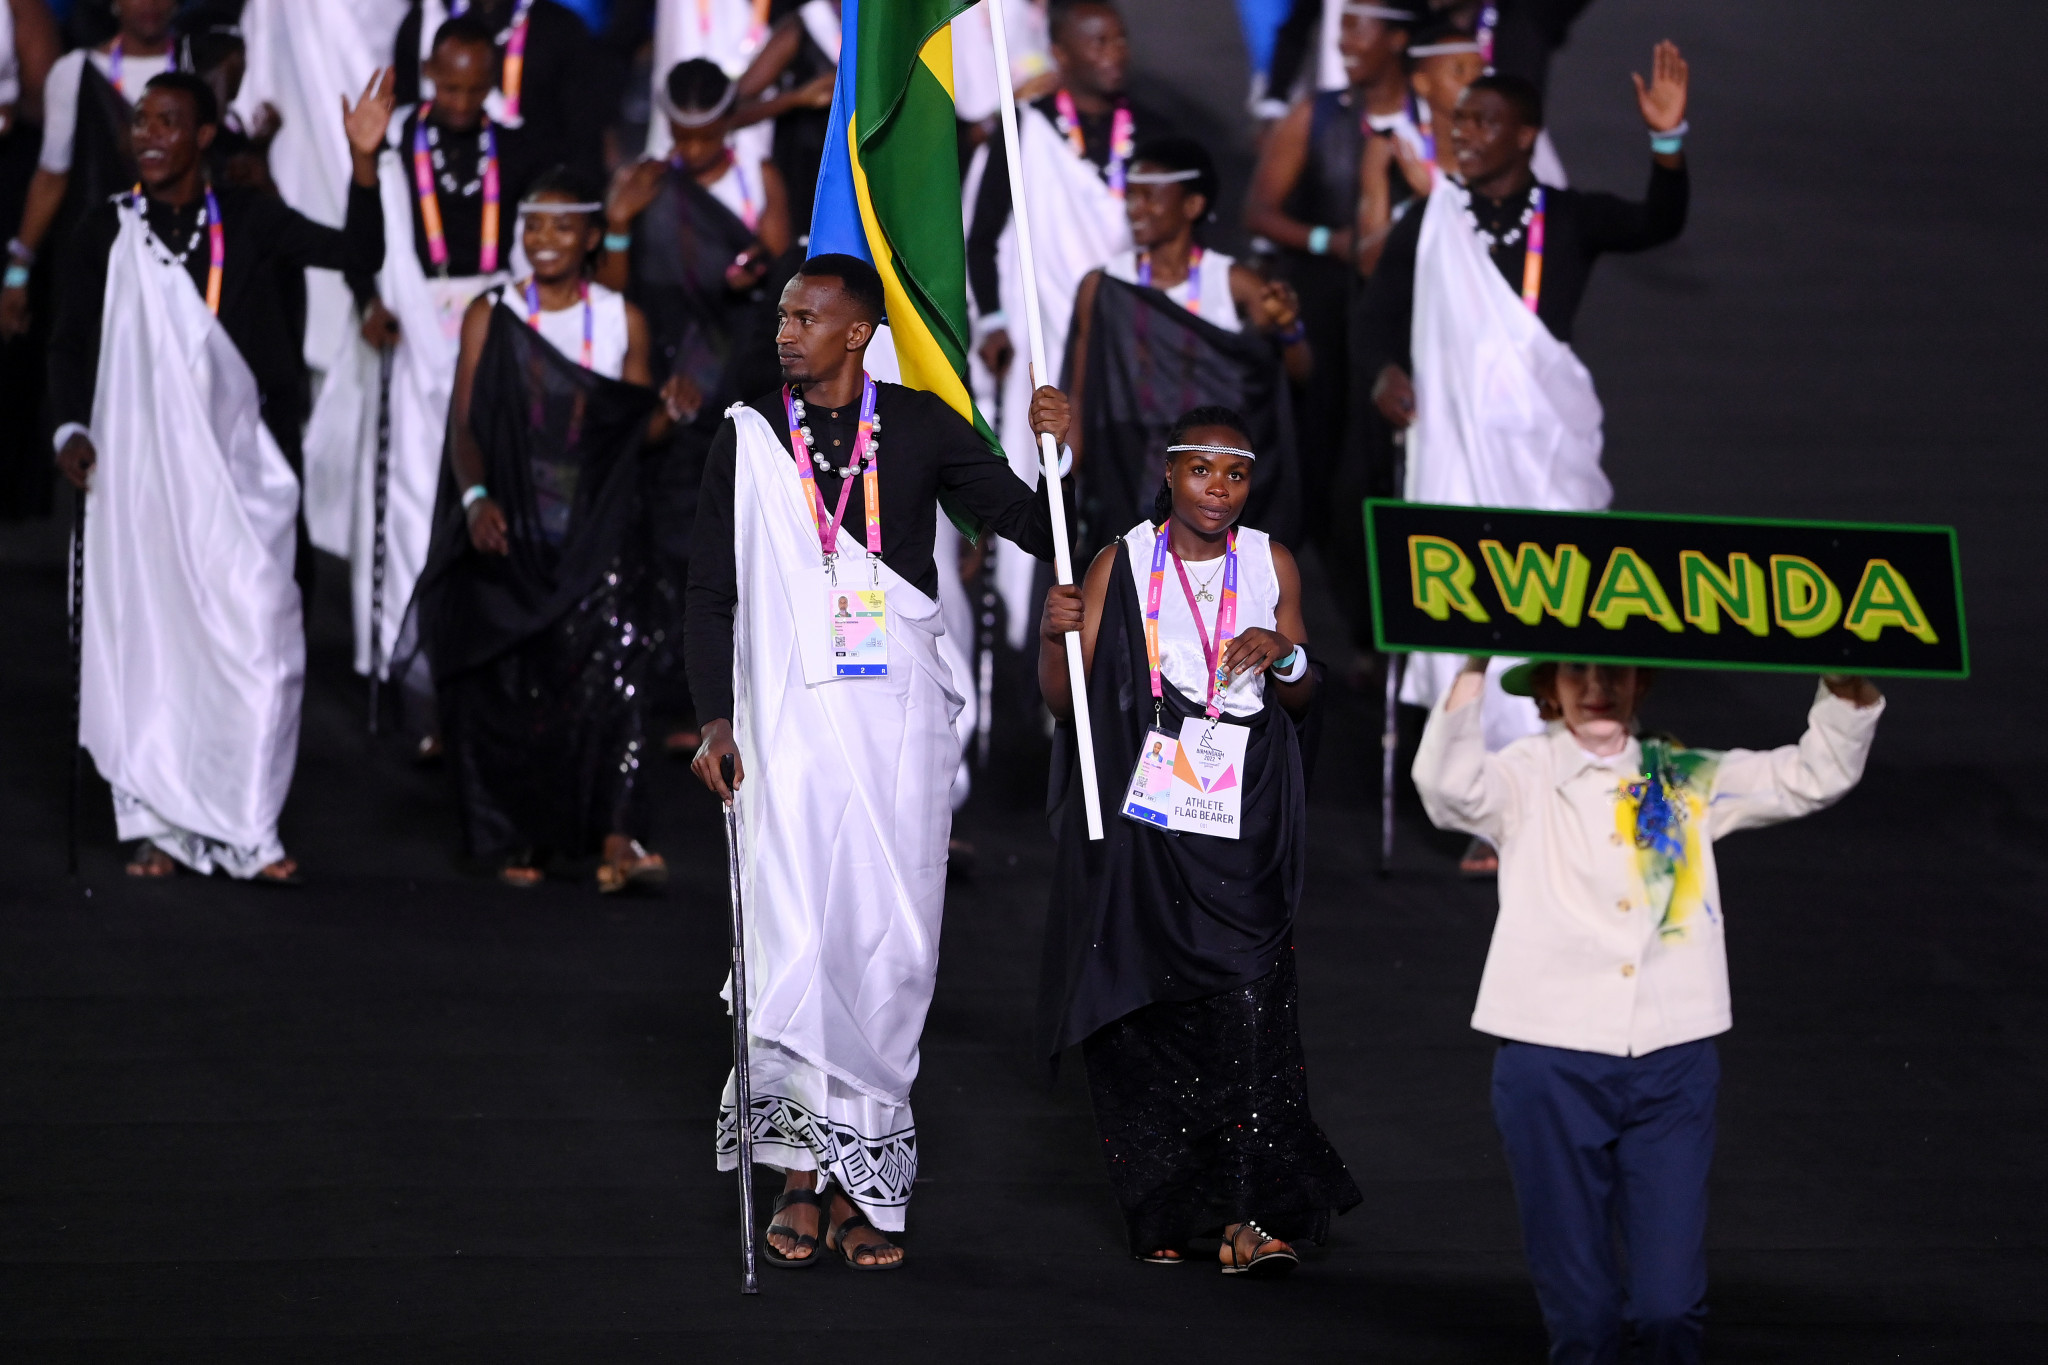 Over 100 athletes in Rwanda selected to begin preparations for 2026 Youth Olympics